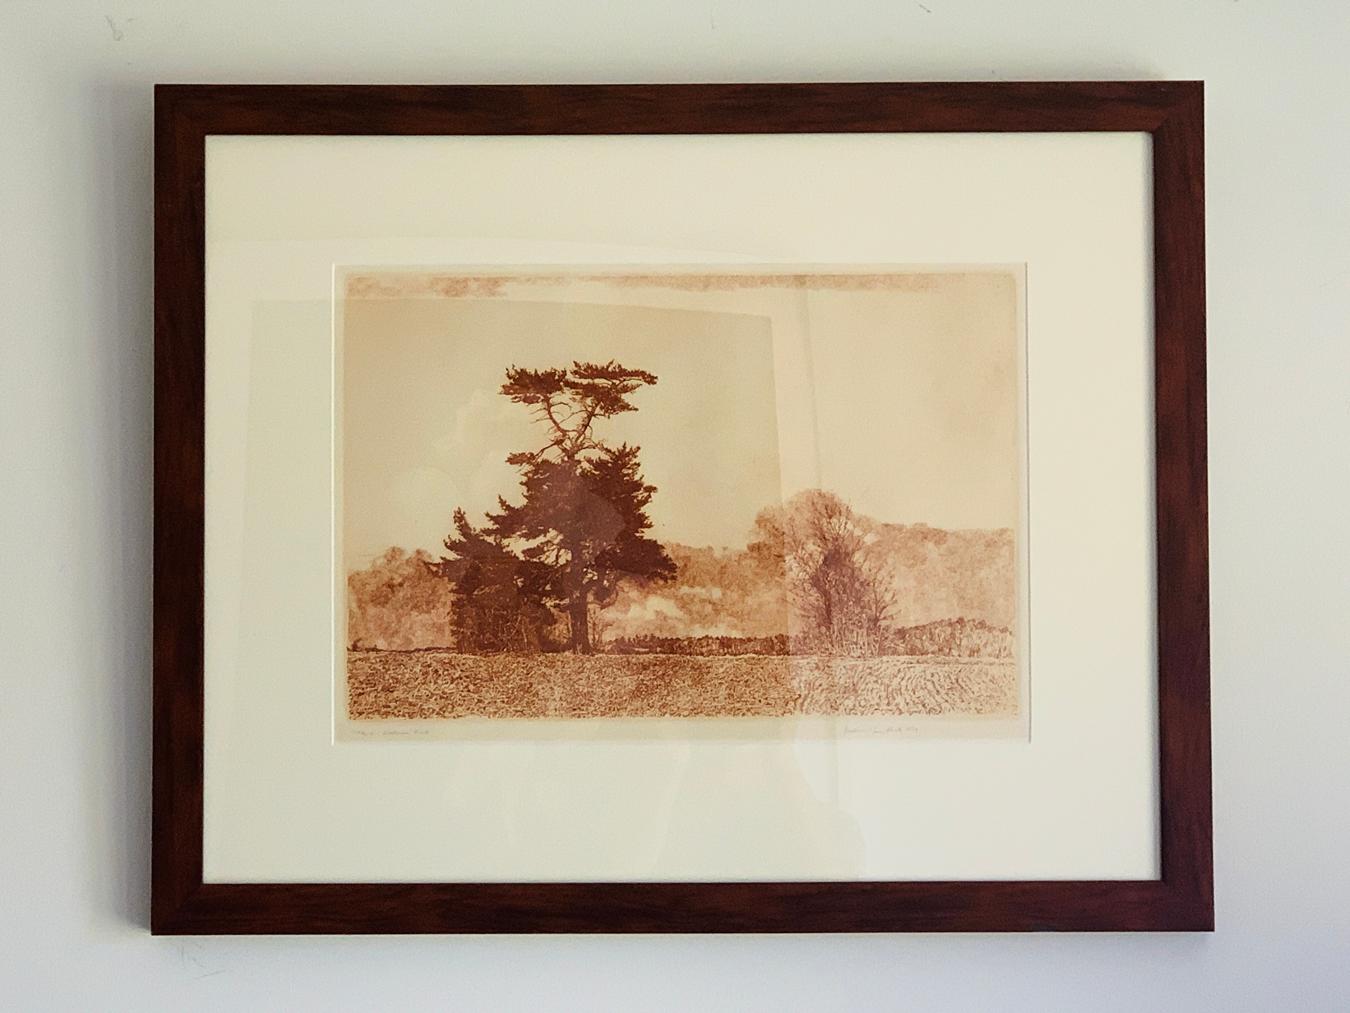 Limited edition pencil signed and numbered 126/250 original Fine art etching by the very well listed artist and print maker Herbert Fink. This is signed and dated in the lower right 